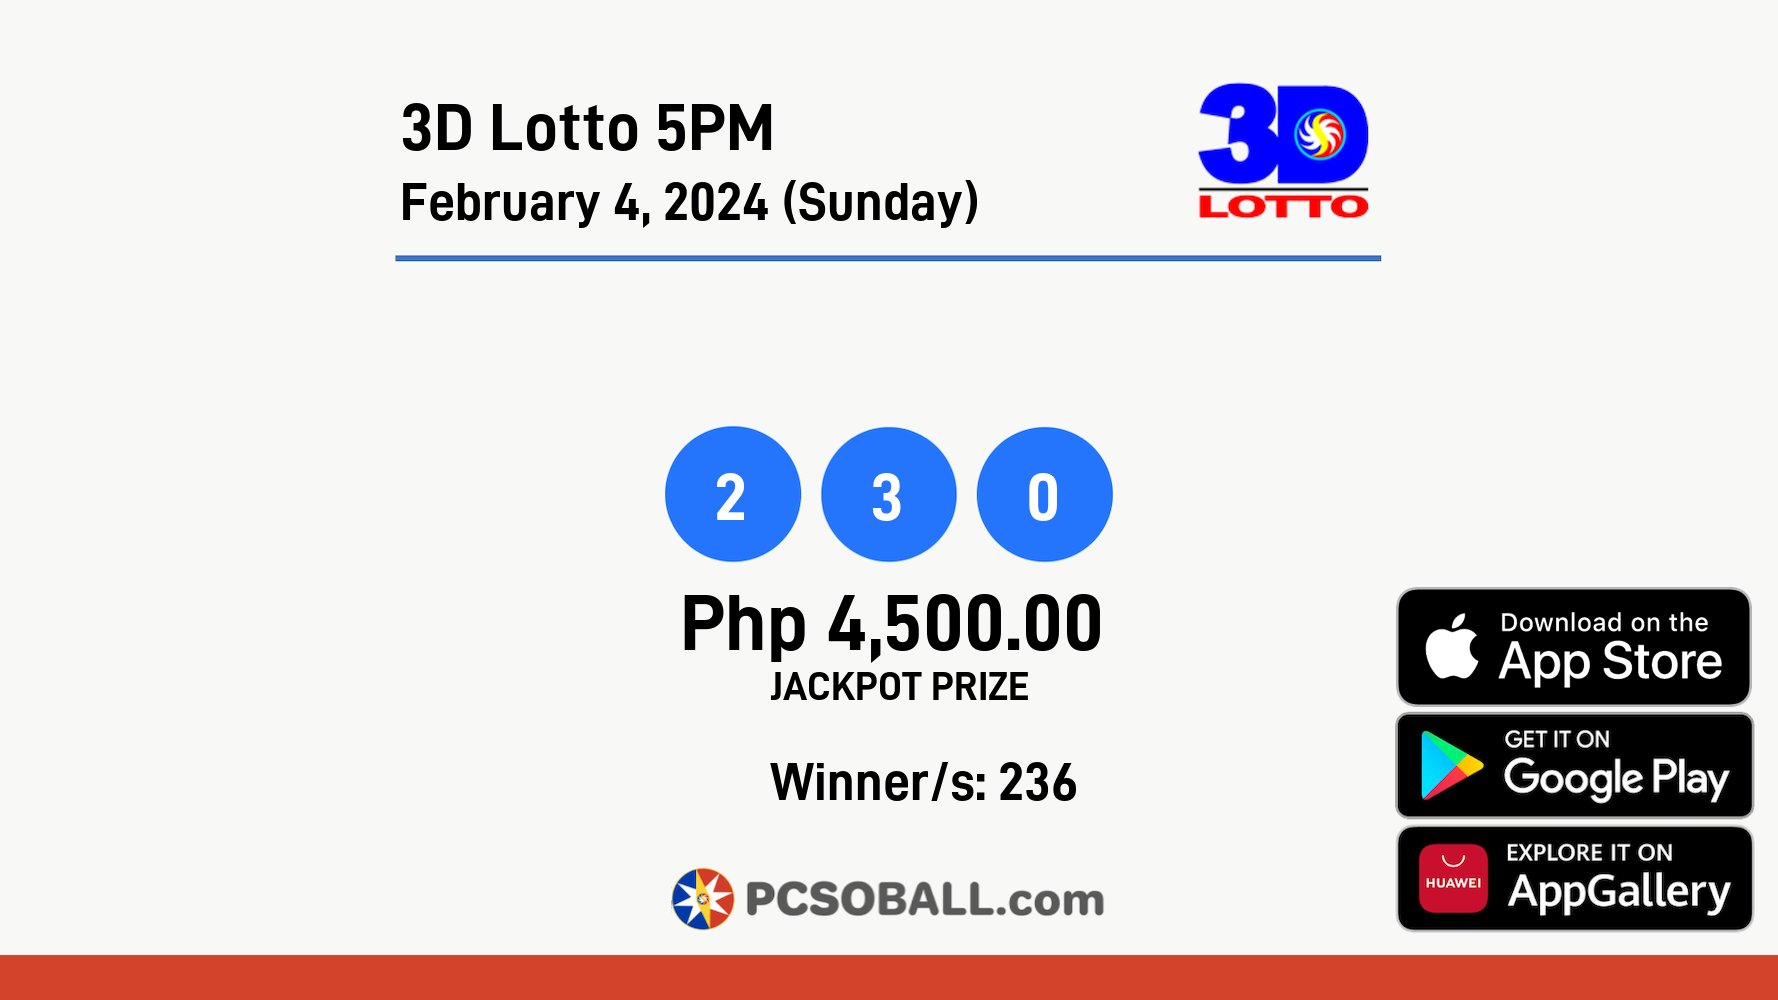 3D Lotto 5PM February 4, 2024 (Sunday) Result